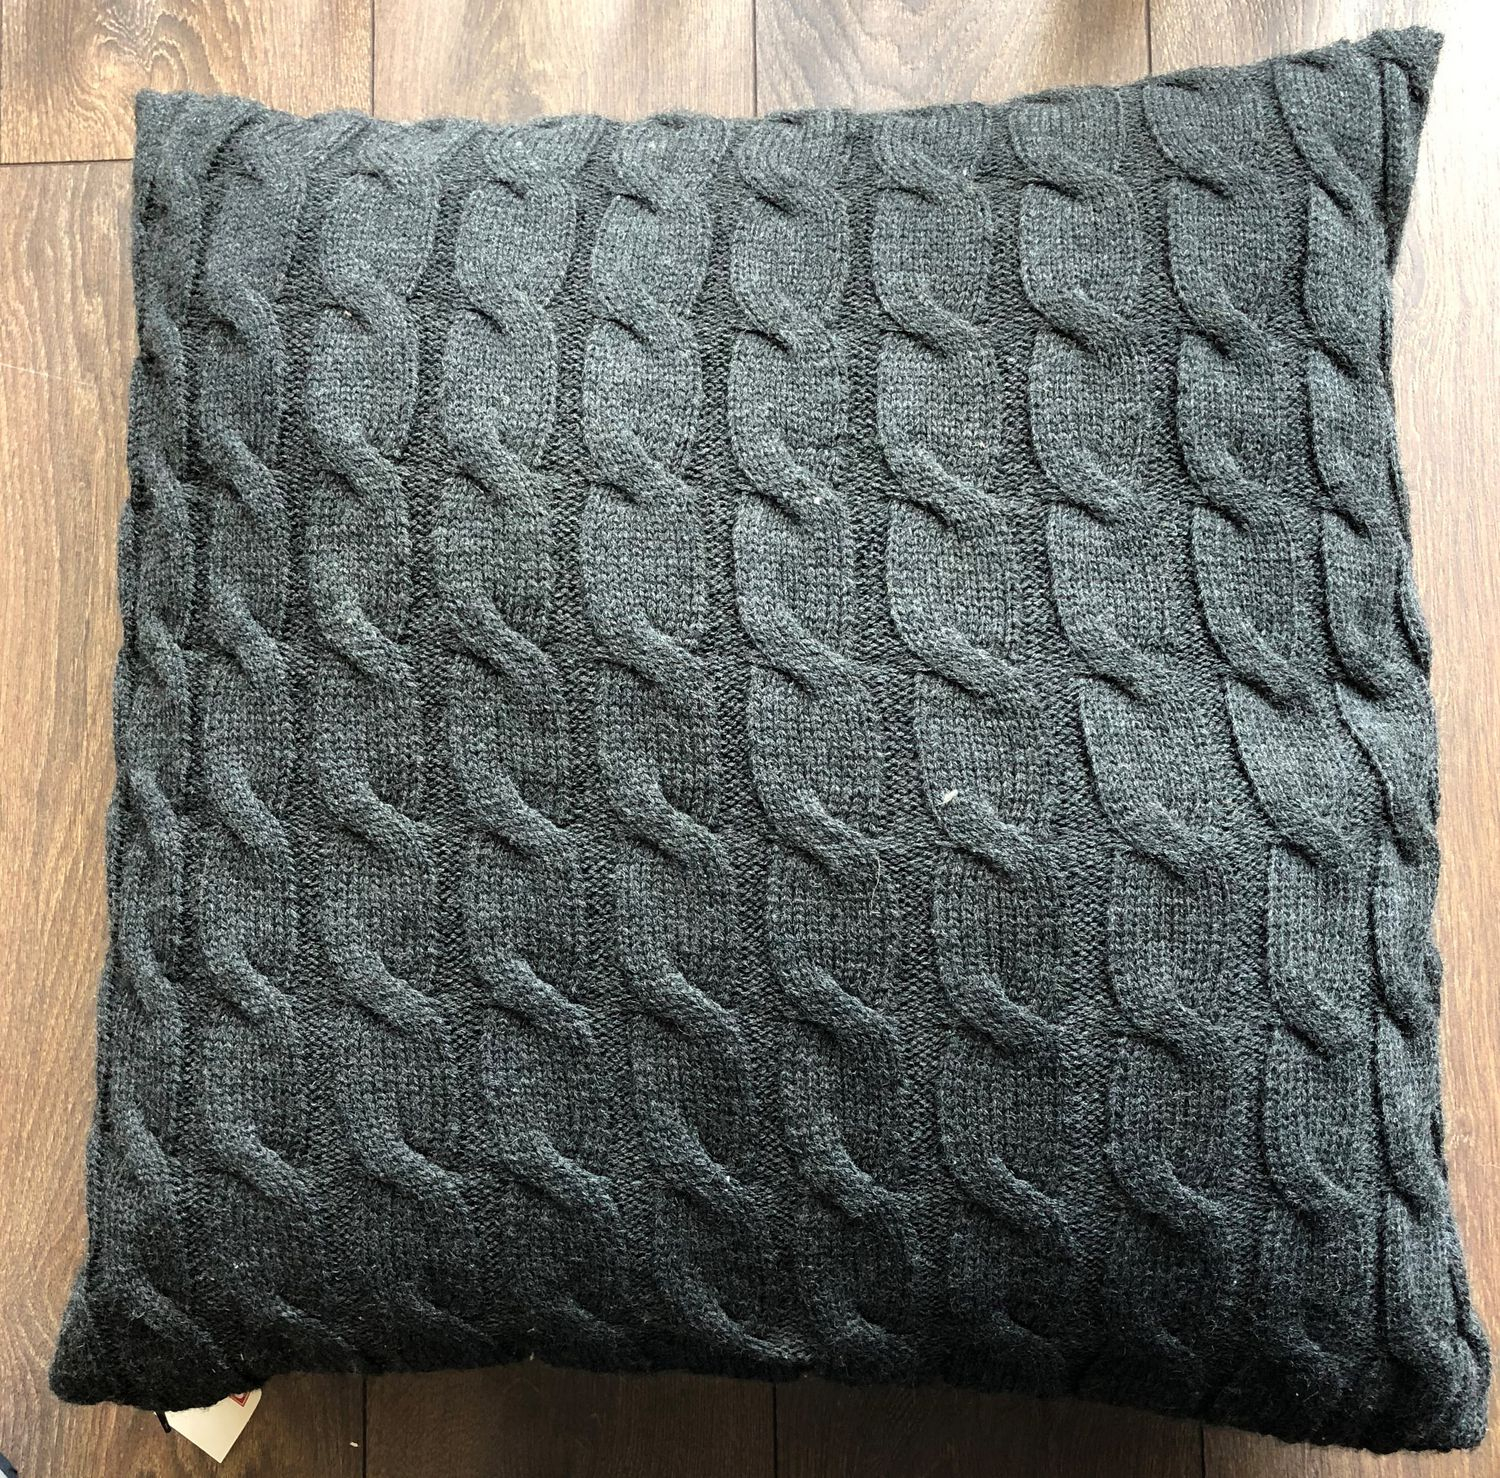 Knitting Pattern For Cushion Cover With Cables Fabstyles Cable Knit Grey Poly Filled Cushion Cover Walmart Canada